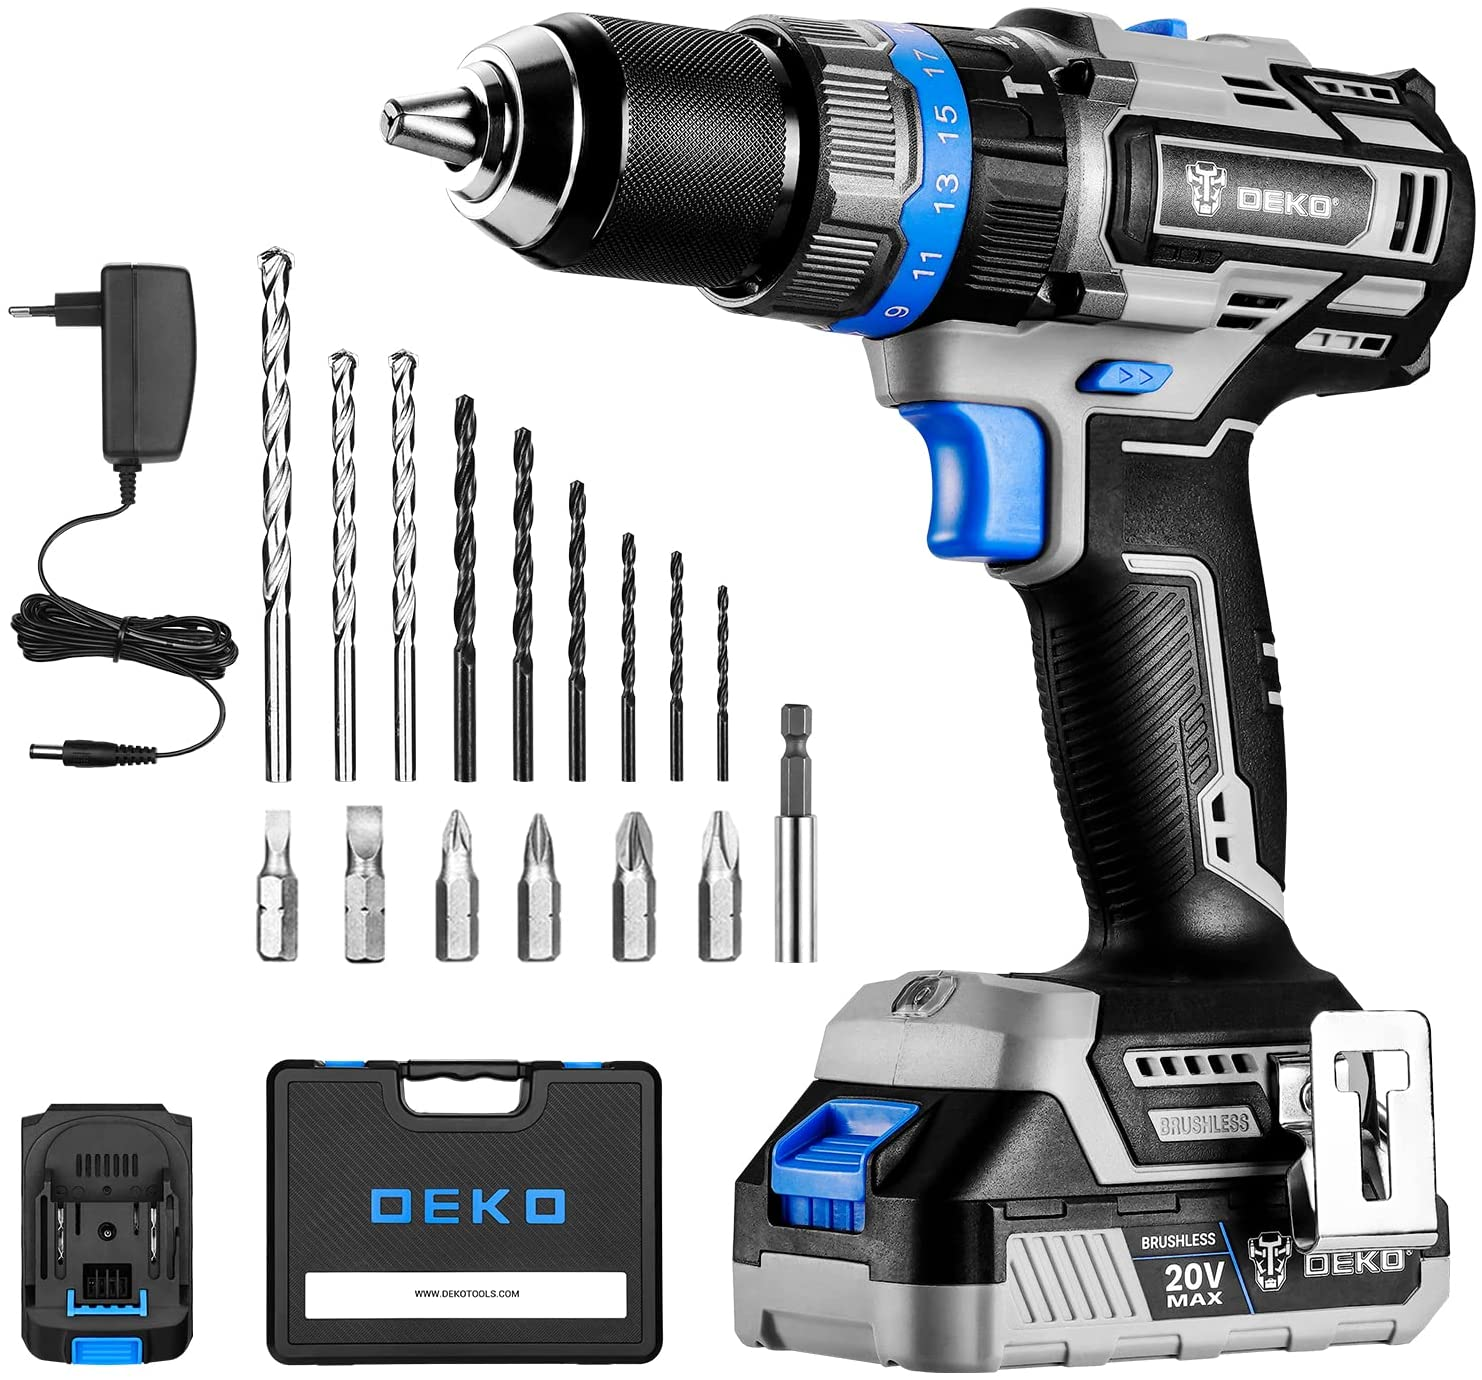 Cordless Drill Set, 20V MAX Brushless Drill Driver Kit, 2X 2.0Ah Li-Ion Batteries, 550 In-Lbs Torque with Impact Hammer Function, 0-450/2000 RPM, 1 Hour Fast Charger, Accessories with BMC BOX